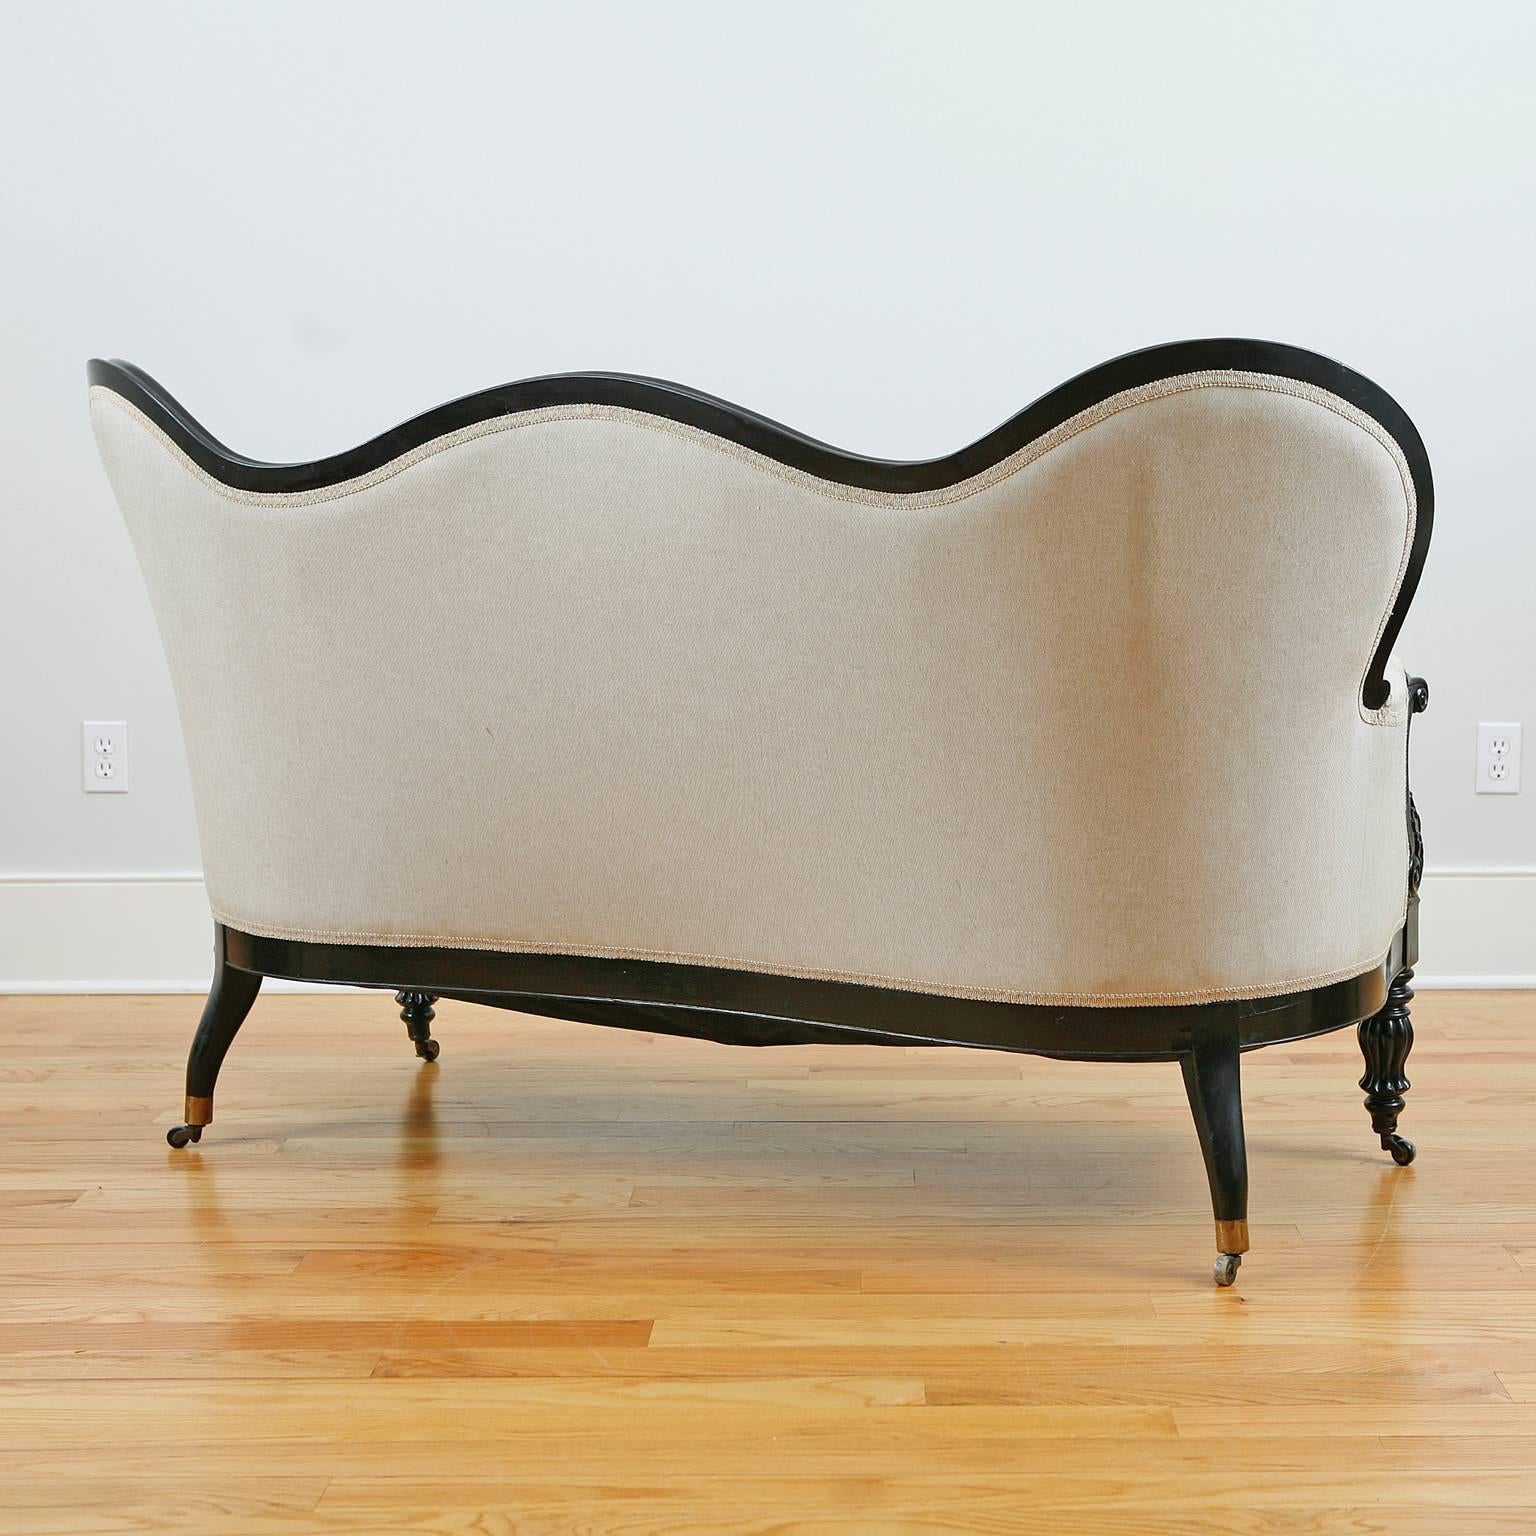 French Napoleon III Upholstered Sofa in Ebonized Wood, circa 1870 In Good Condition For Sale In Miami, FL